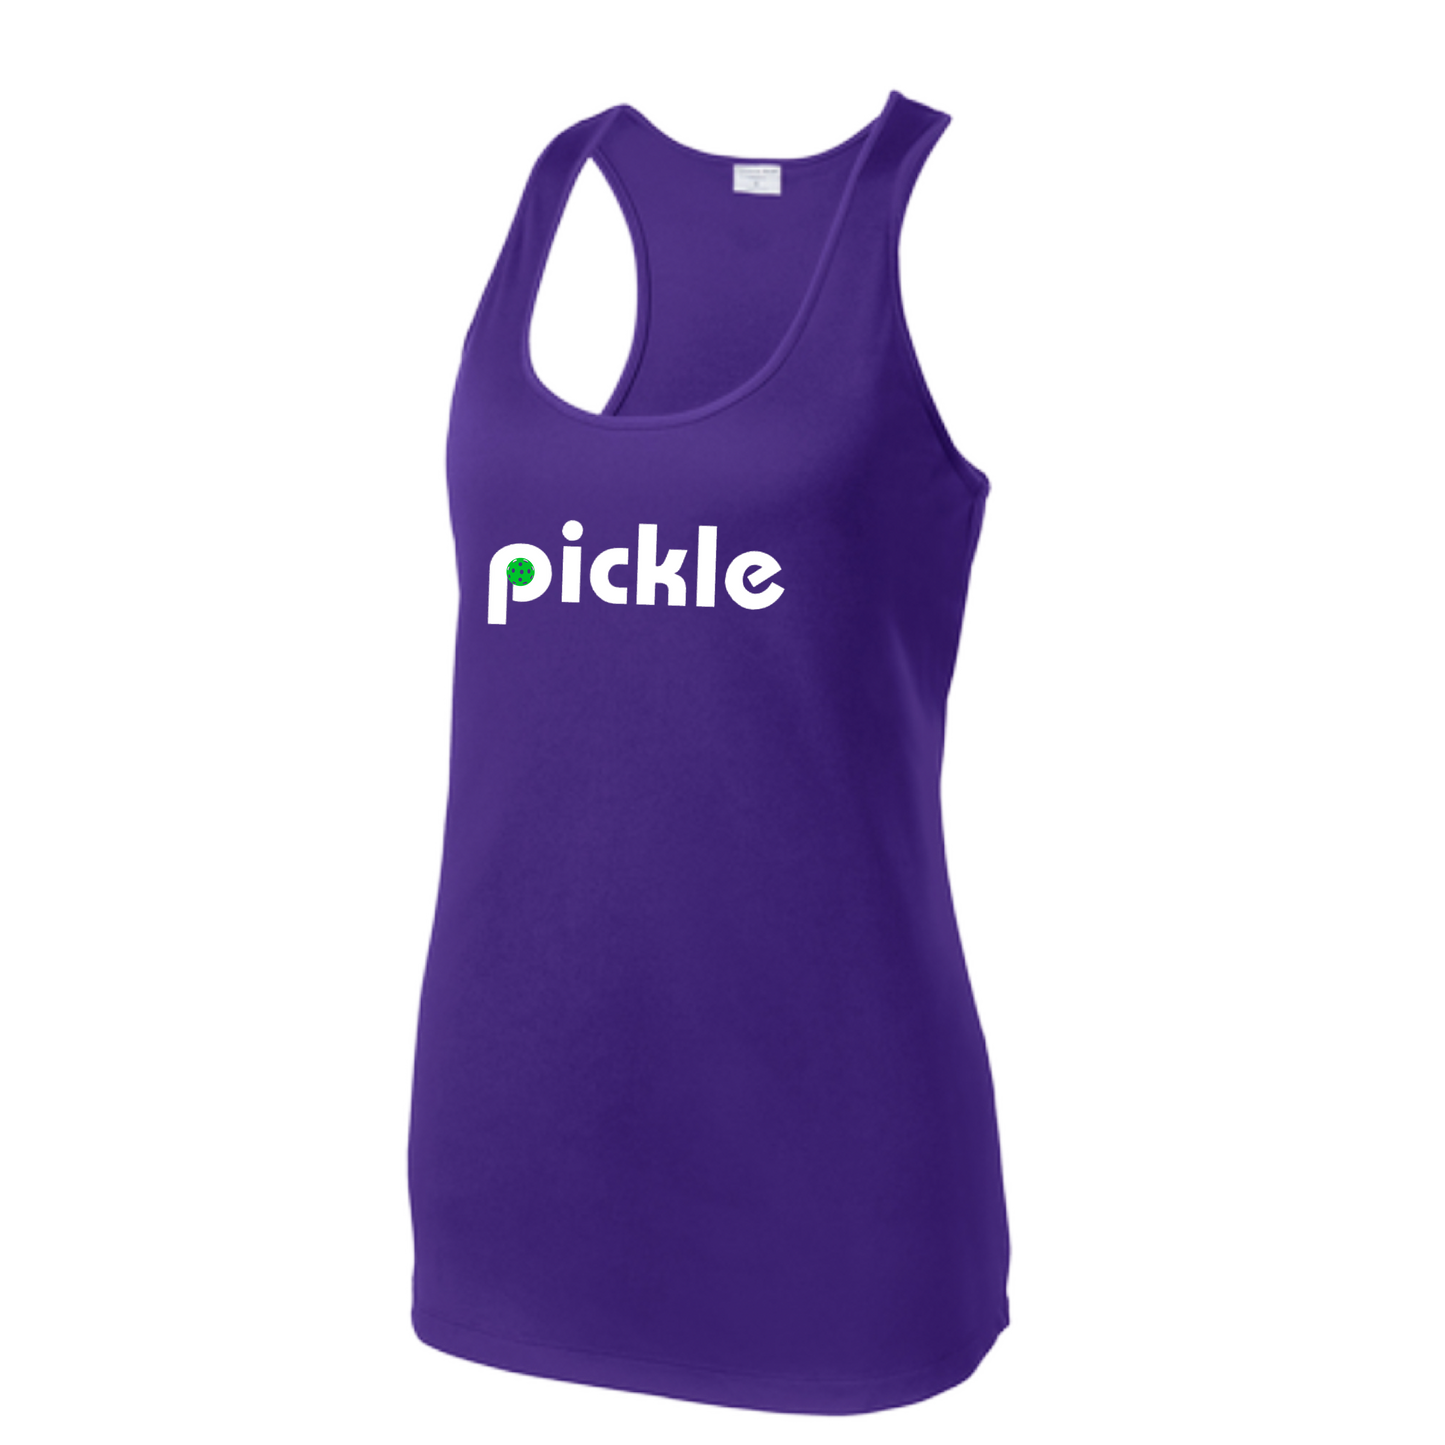 Experience the great combination of comfort and style with this Women's pickleball shirt. Crafted with a tri-blend material, it is highly breathable and lightweight, with added moisture wicking and PosiCharge technology for locked-in color.